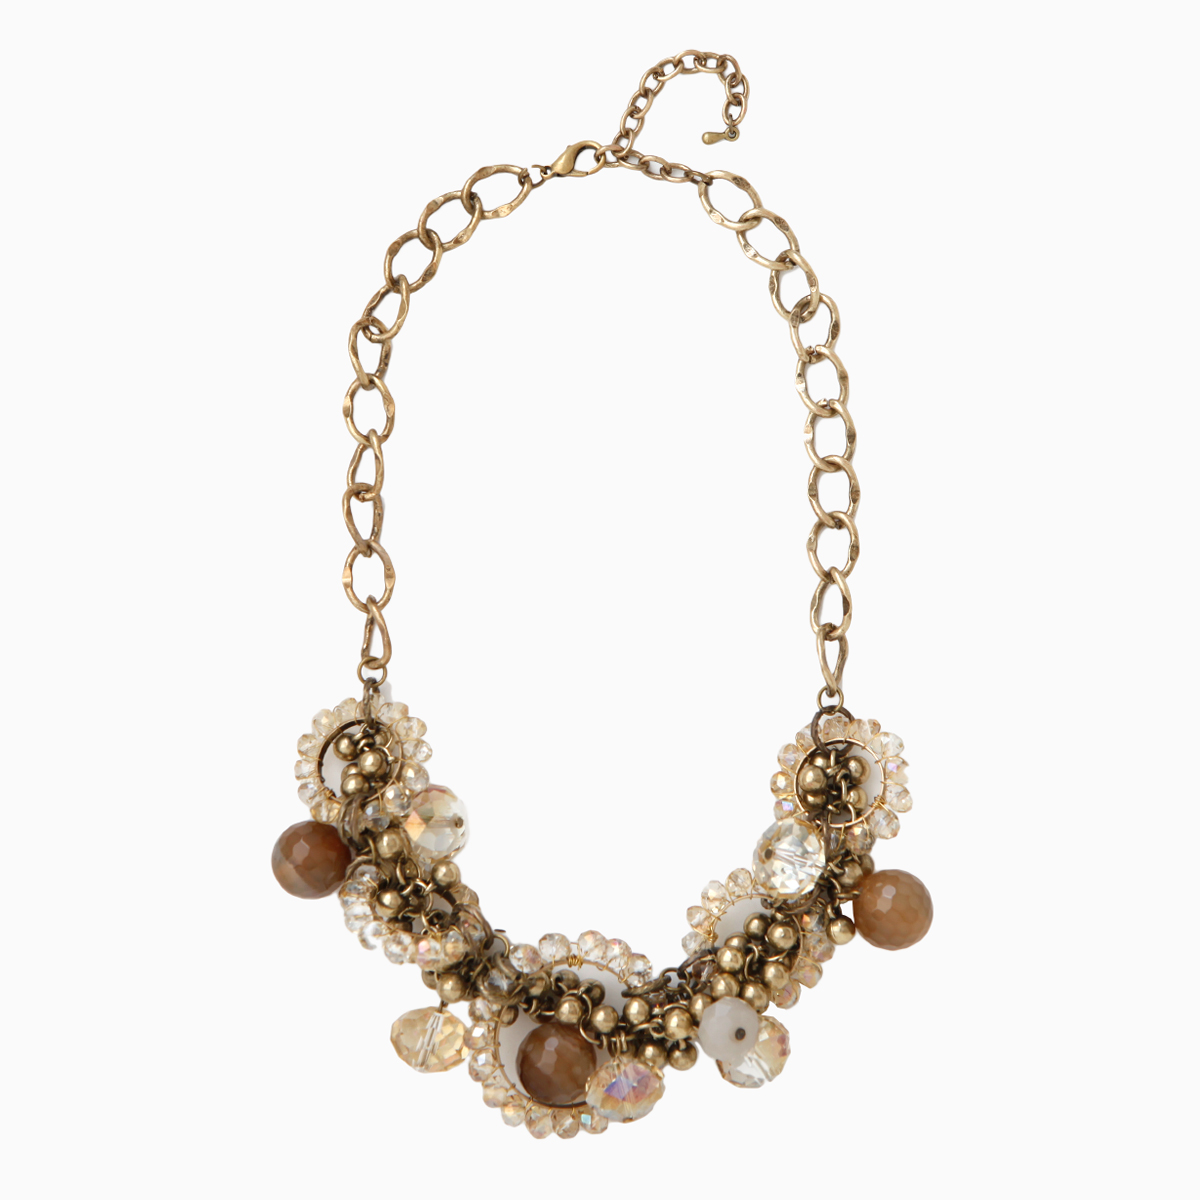 Circus Beaded Necklace in Gold | DAILYLOOK